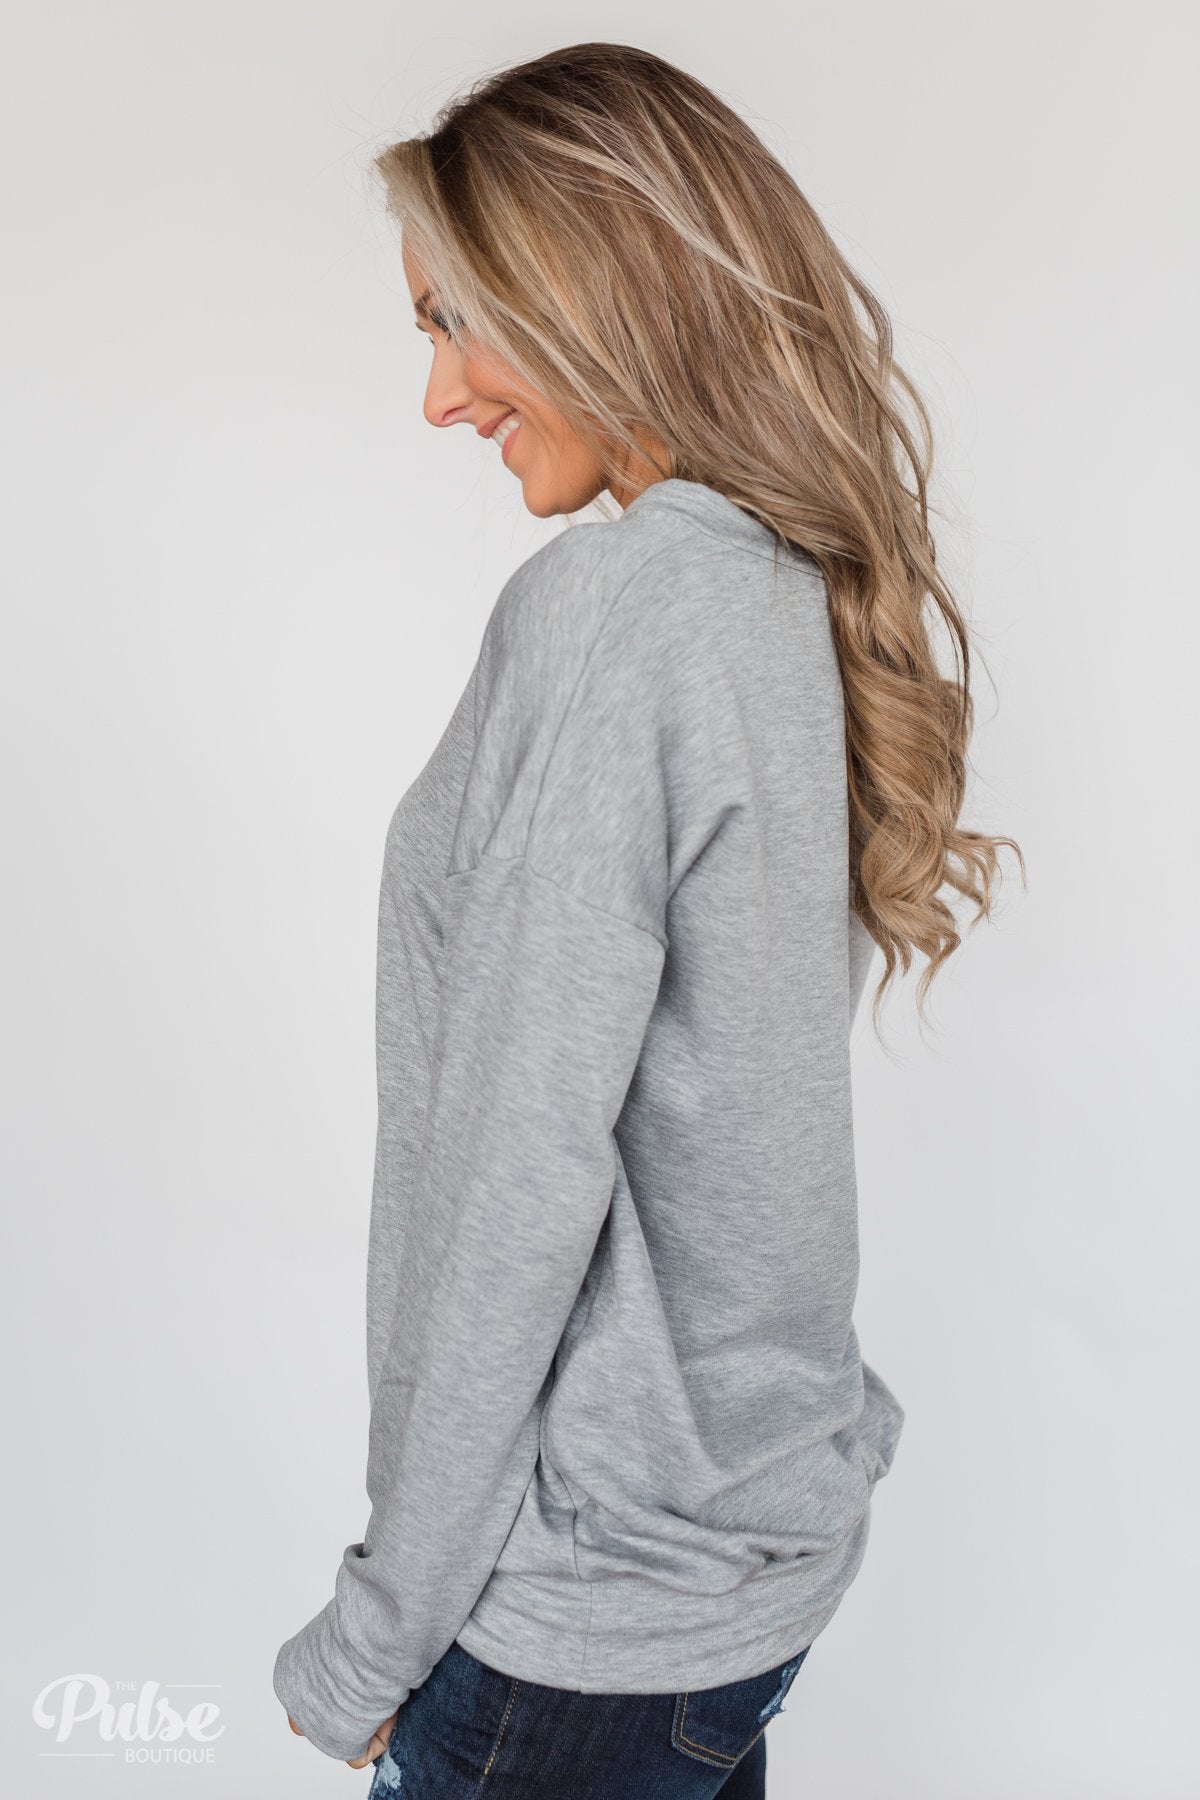 You Crossed My Path Sweatshirt- Heather Grey – The Pulse Boutique